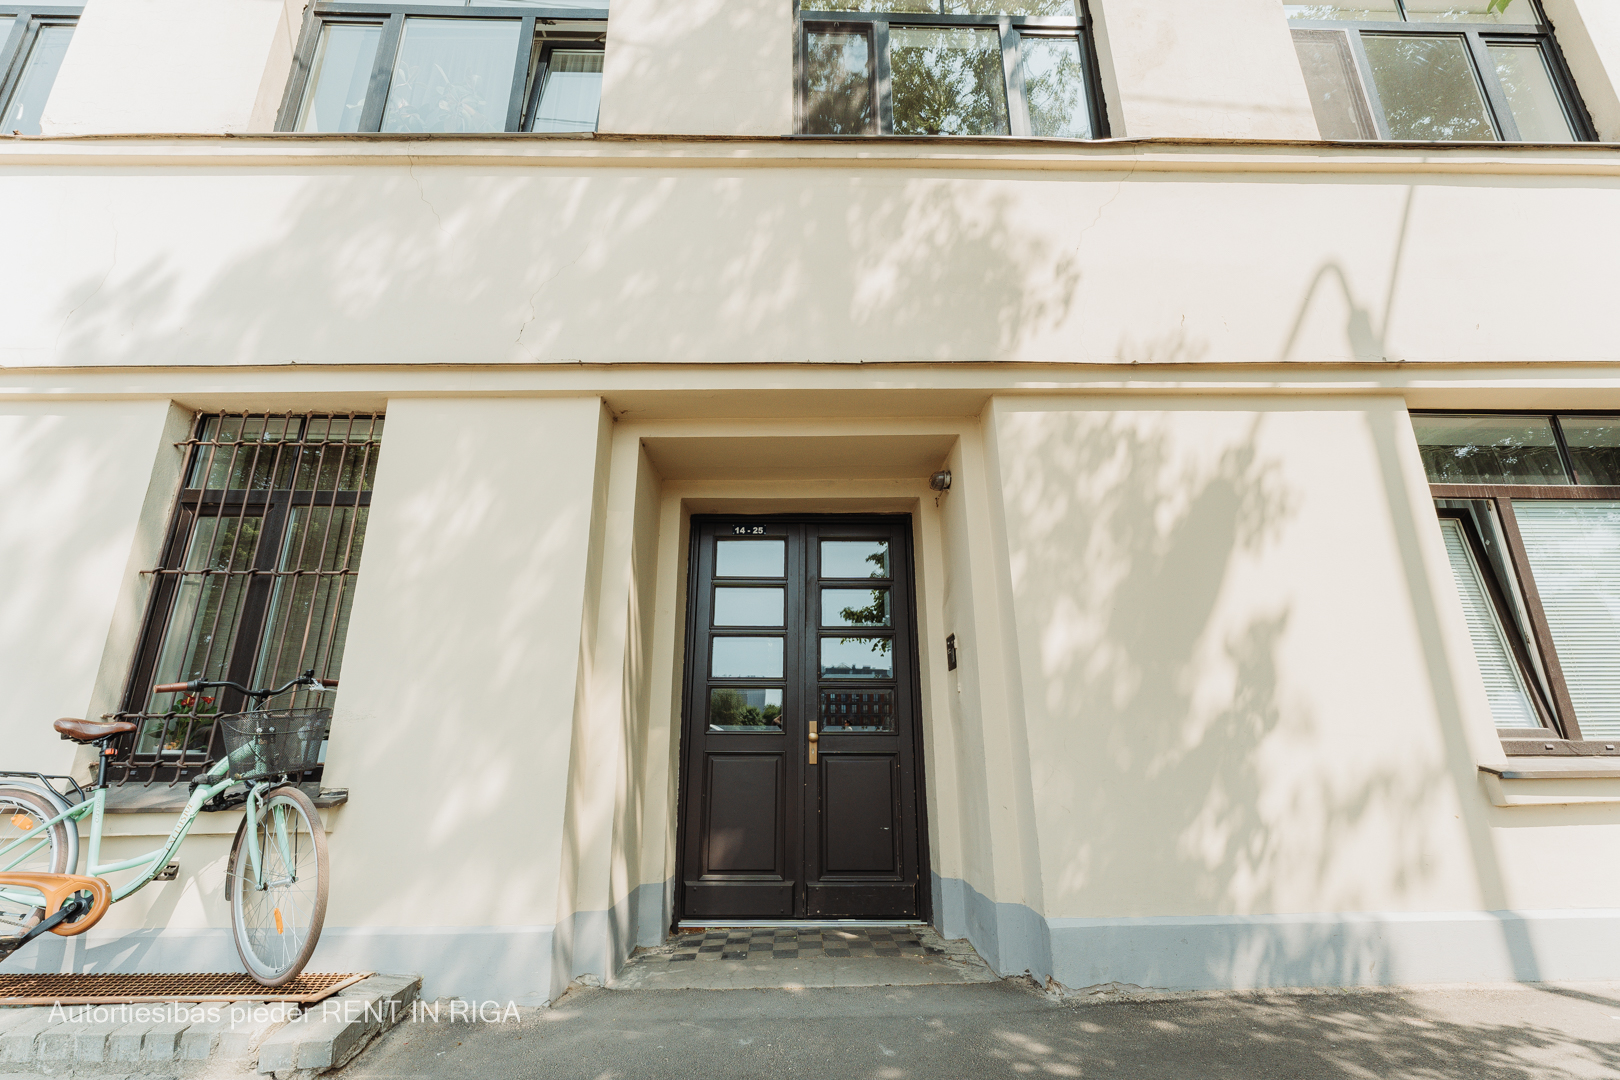 Apartment for rent, Hanzas street 6 - Image 1